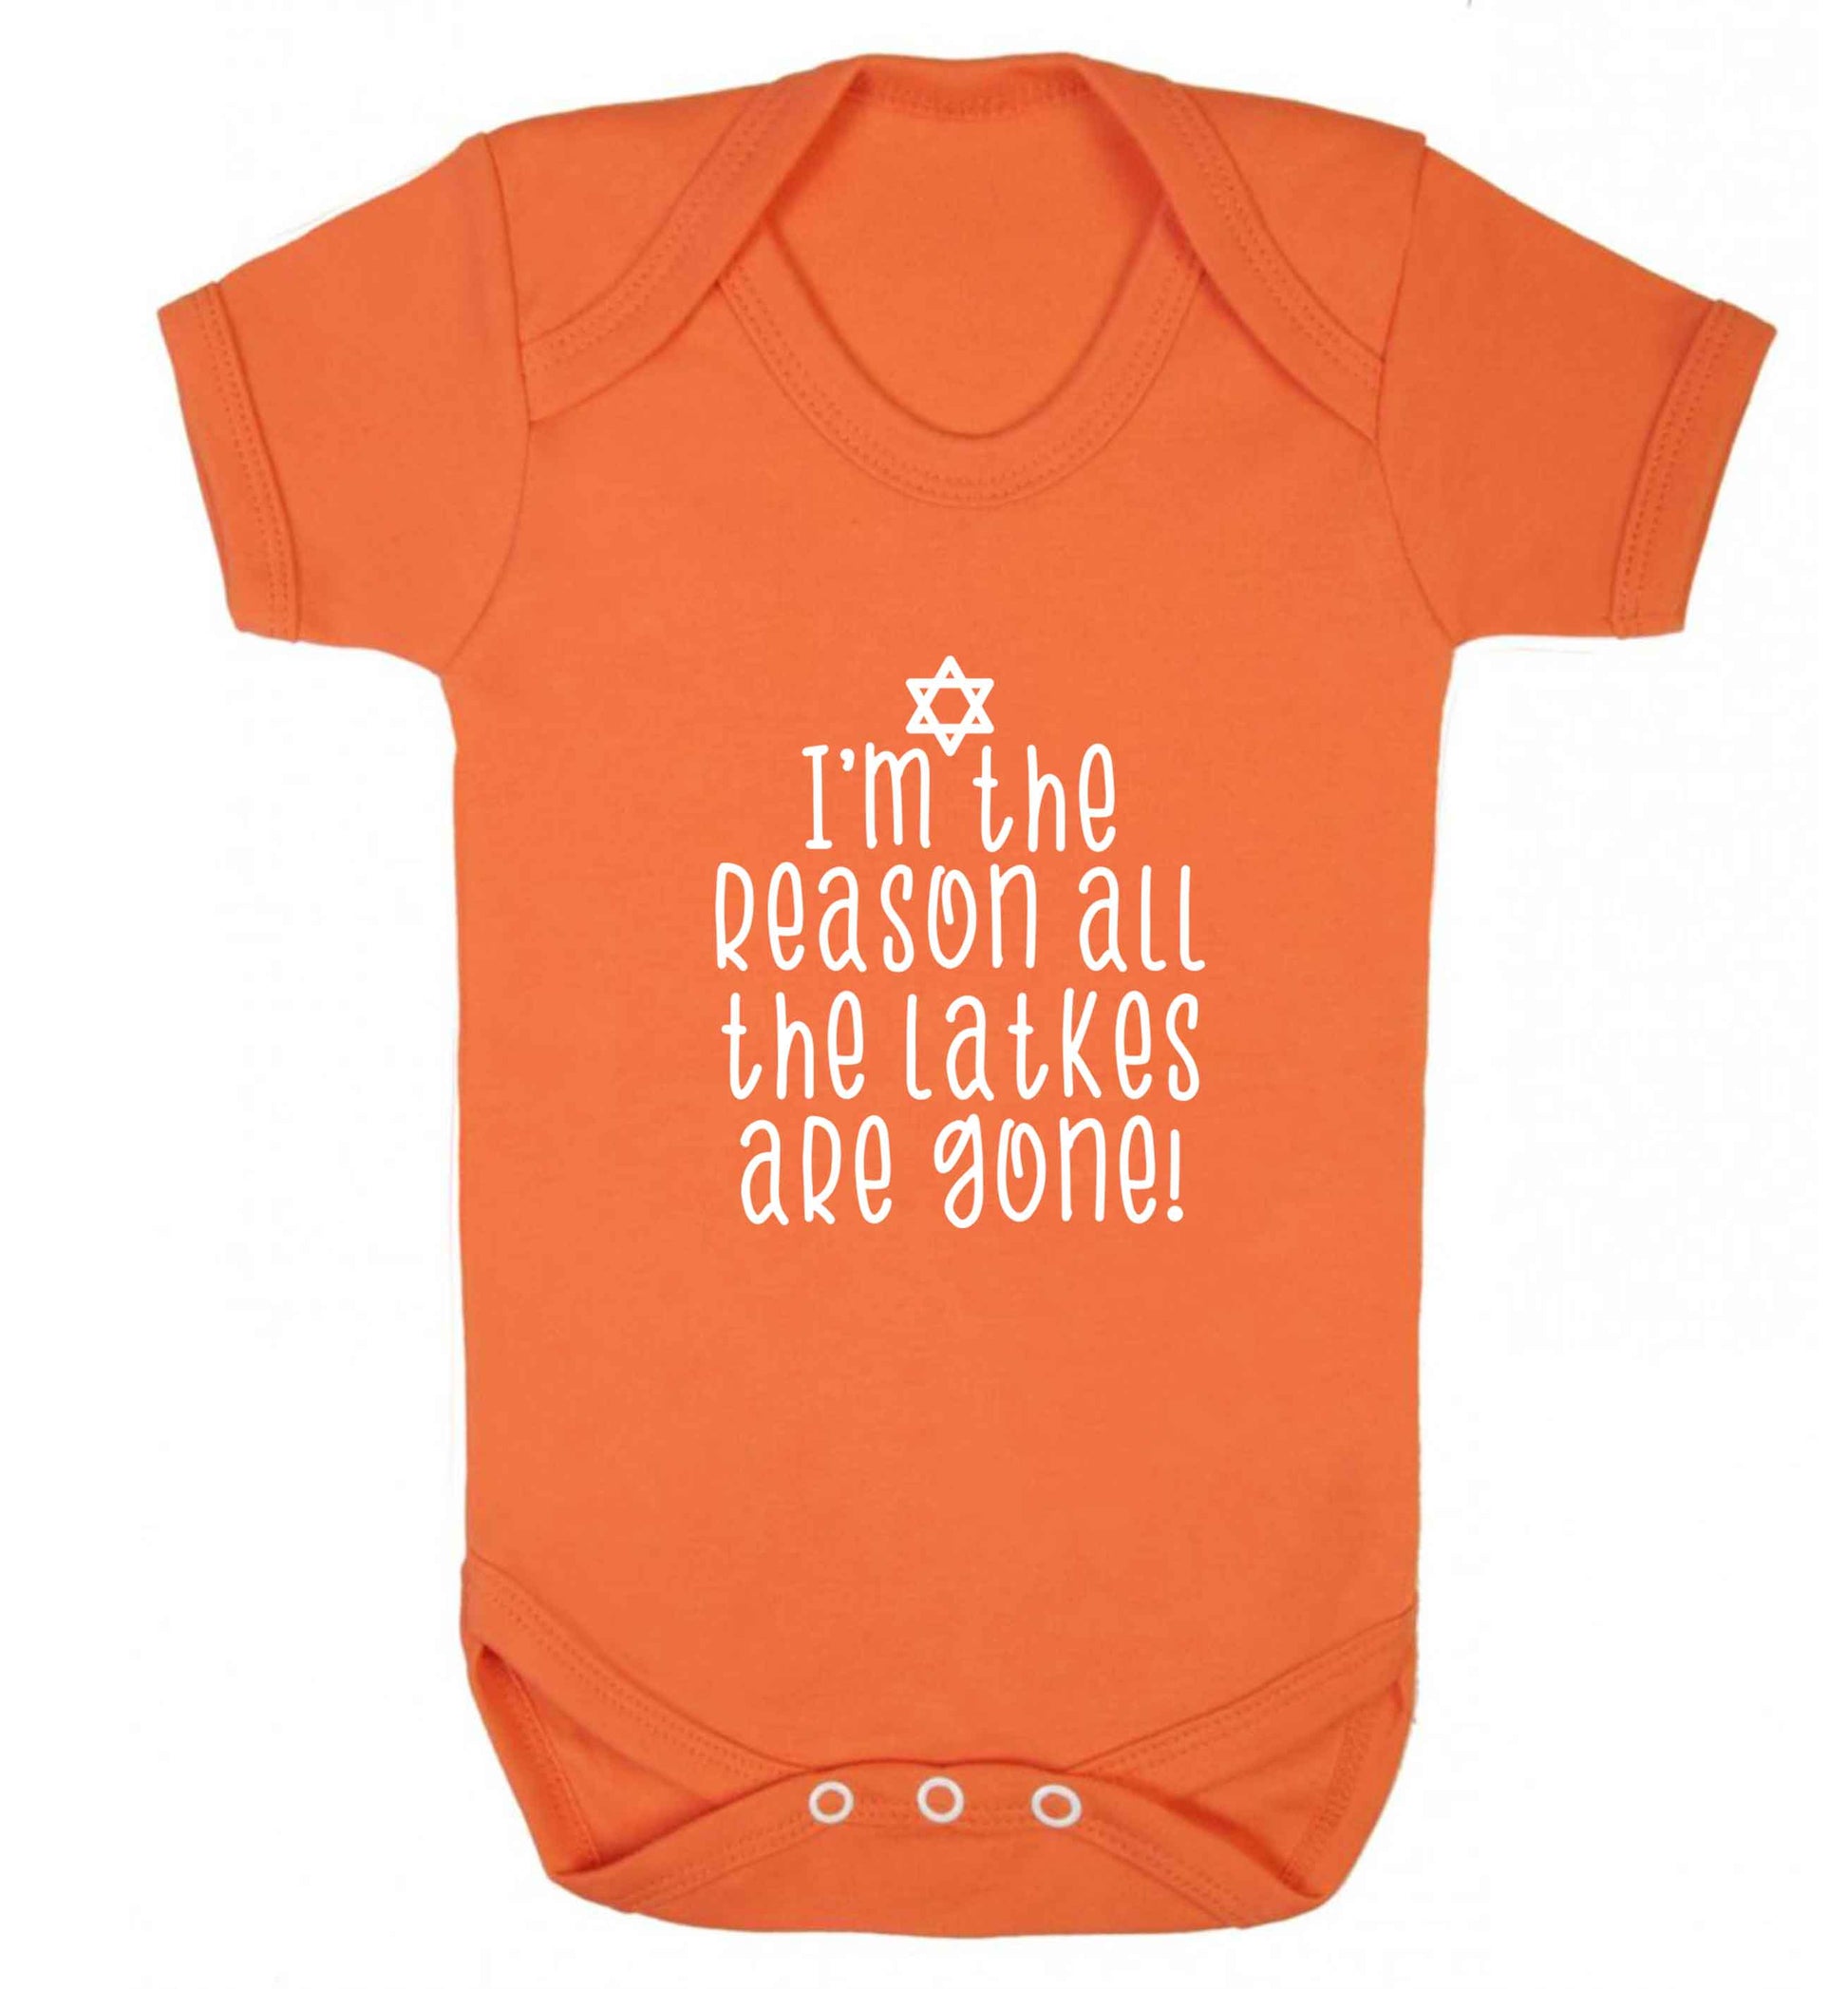 I'm the reason all the latkes are gone baby vest orange 18-24 months